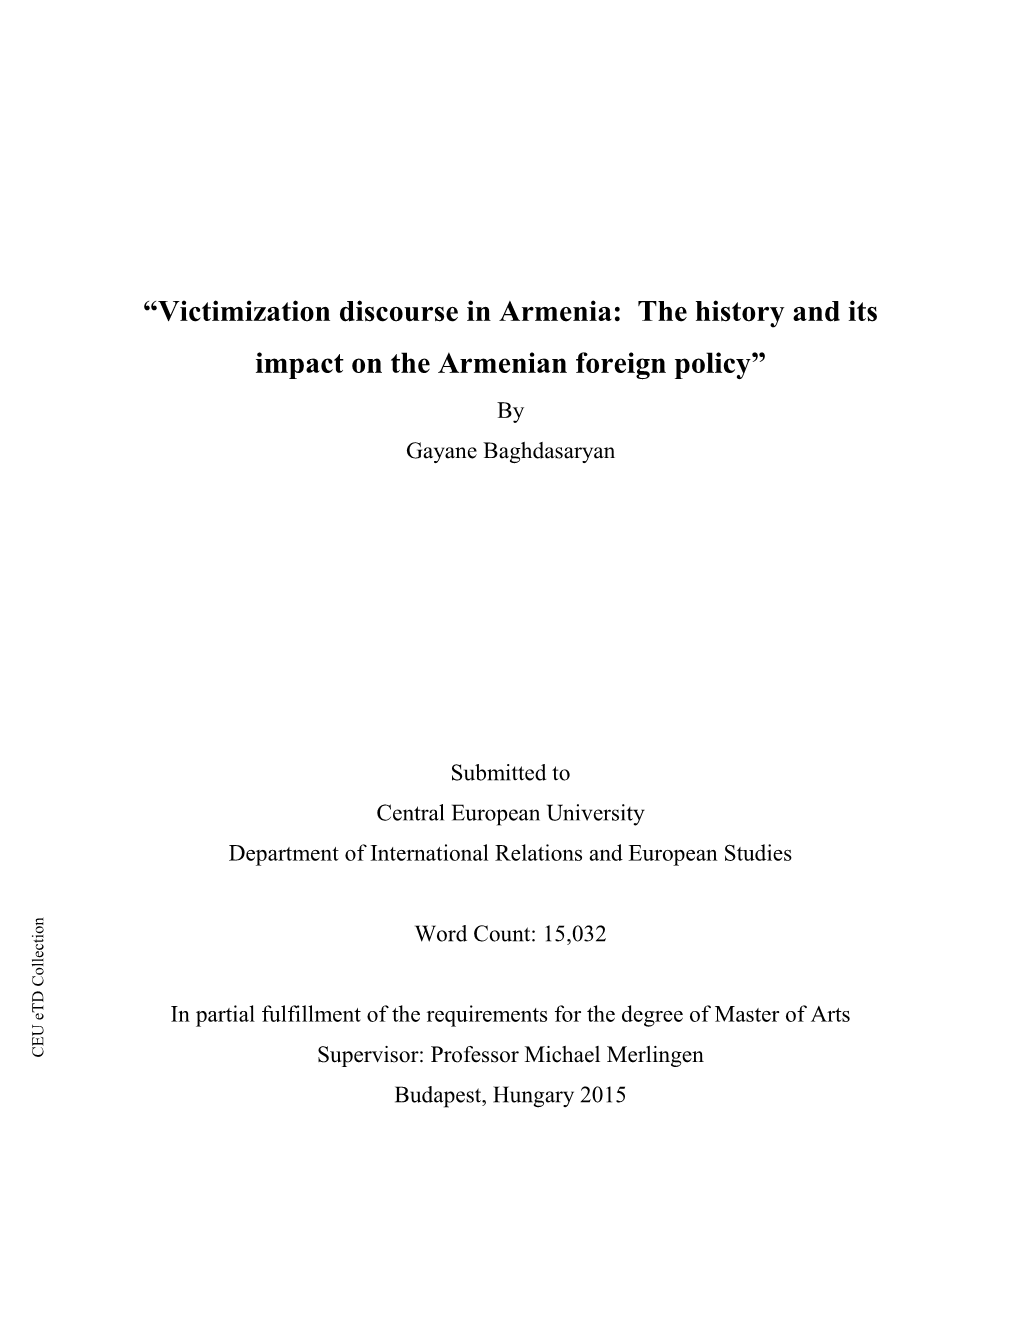 Victimization Discourse in Armenia: the History and Its Impact on the Armenian Foreign Policy